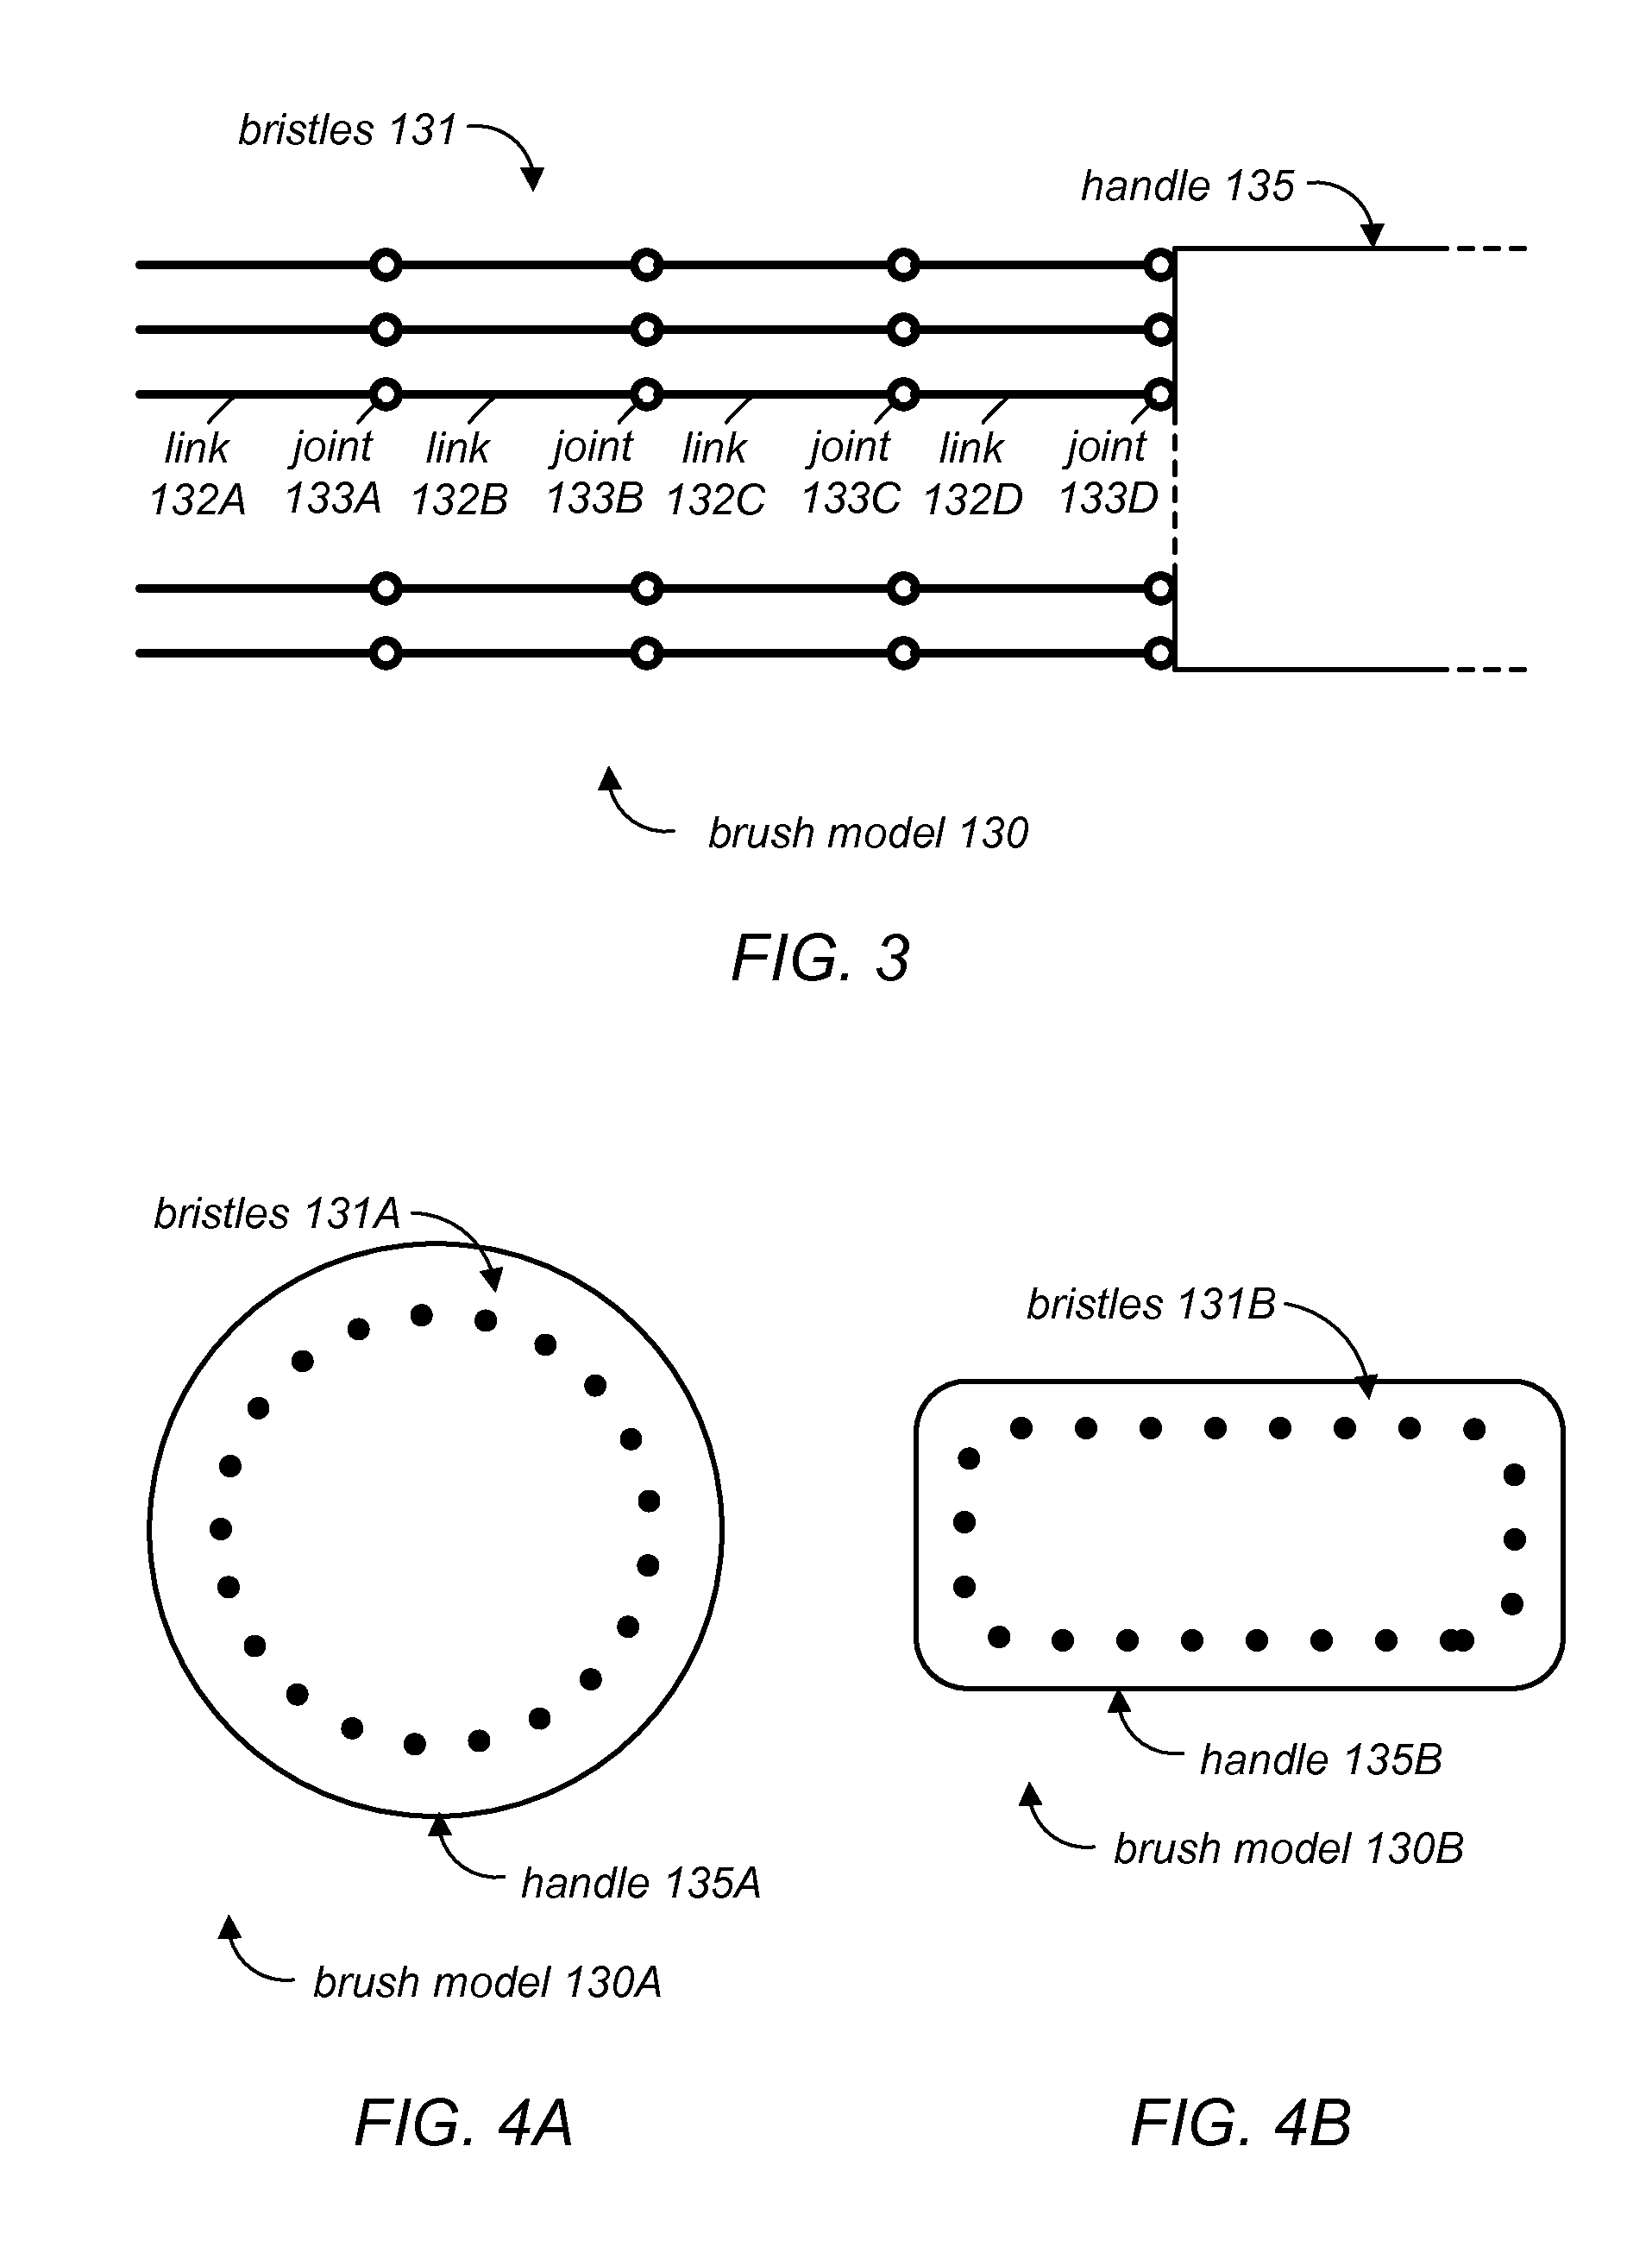 System and Method for Simulation of Brush-Based Painting In a Color Space That Includes a Fill Channel